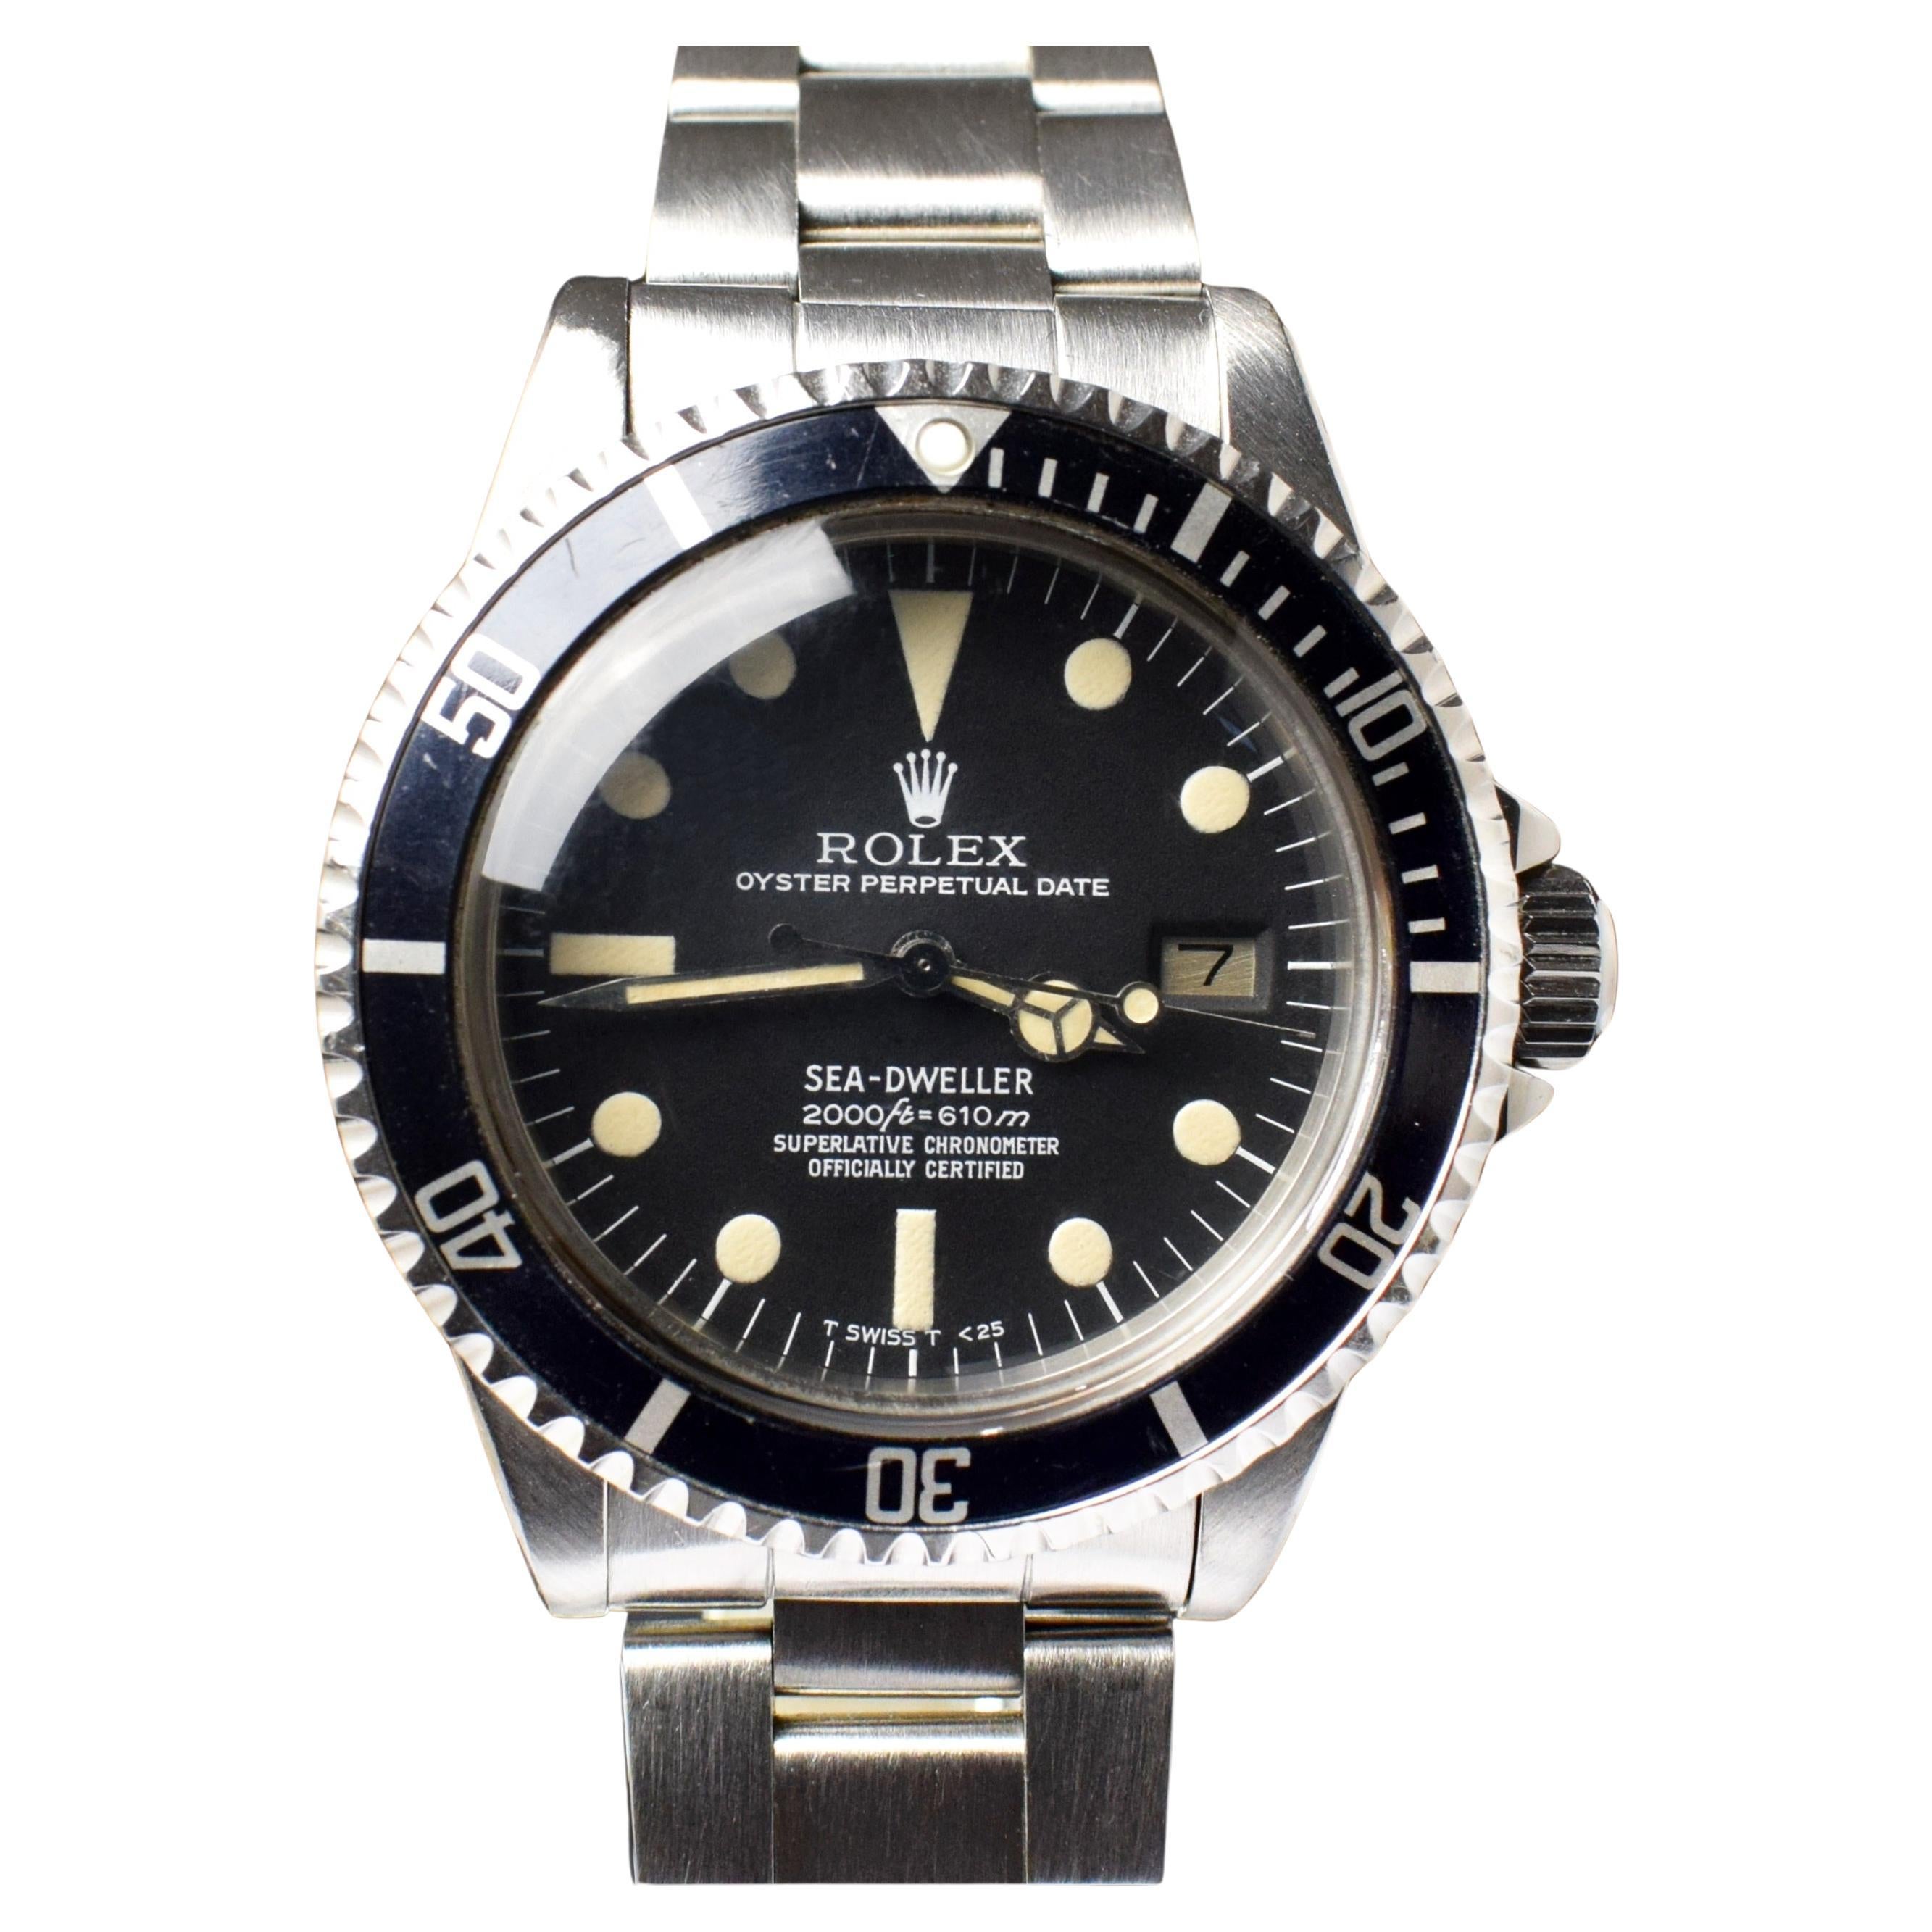 Rolex Submariner Sea-Dweller Rail Dial 1665 Steel Automatic Watch 1978 For Sale